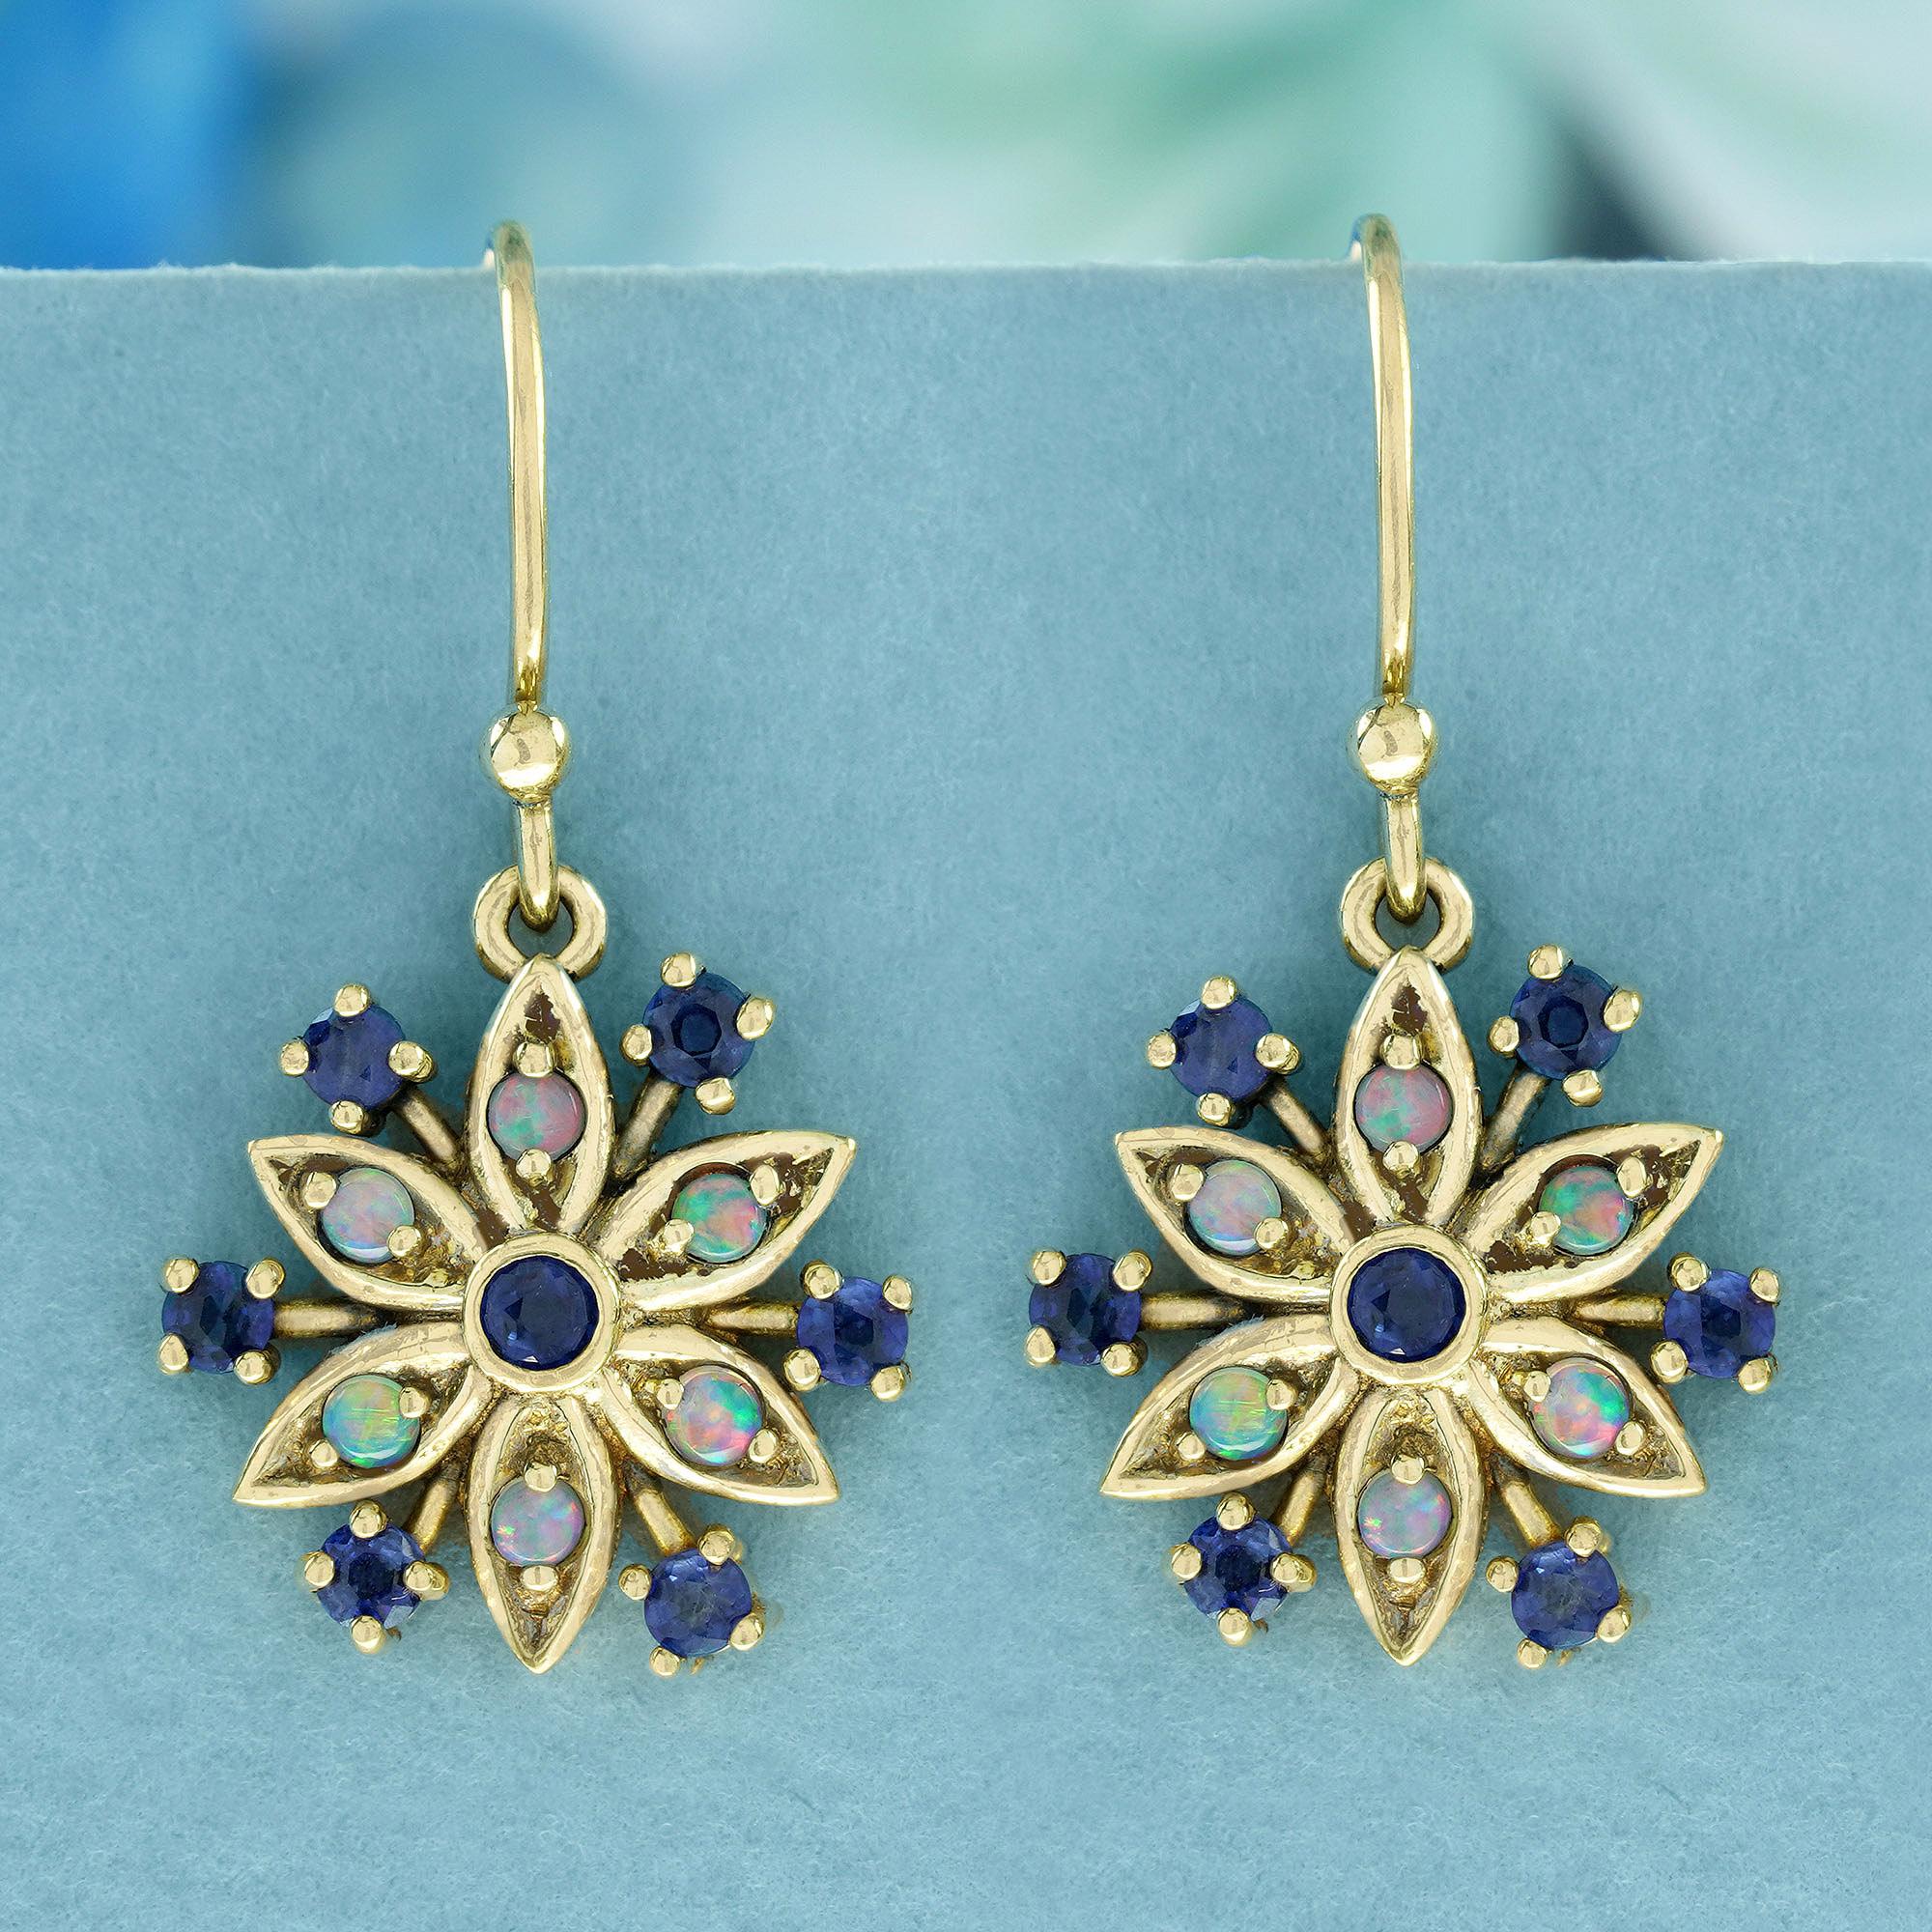 Crafted from luminous yellow gold, these vintage-style earrings boast a Floral Cluster Drop design. Each earring showcases a single floral cluster composed of round Blue Sapphires and Opals set in prongs, adorned with intricate floral openwork